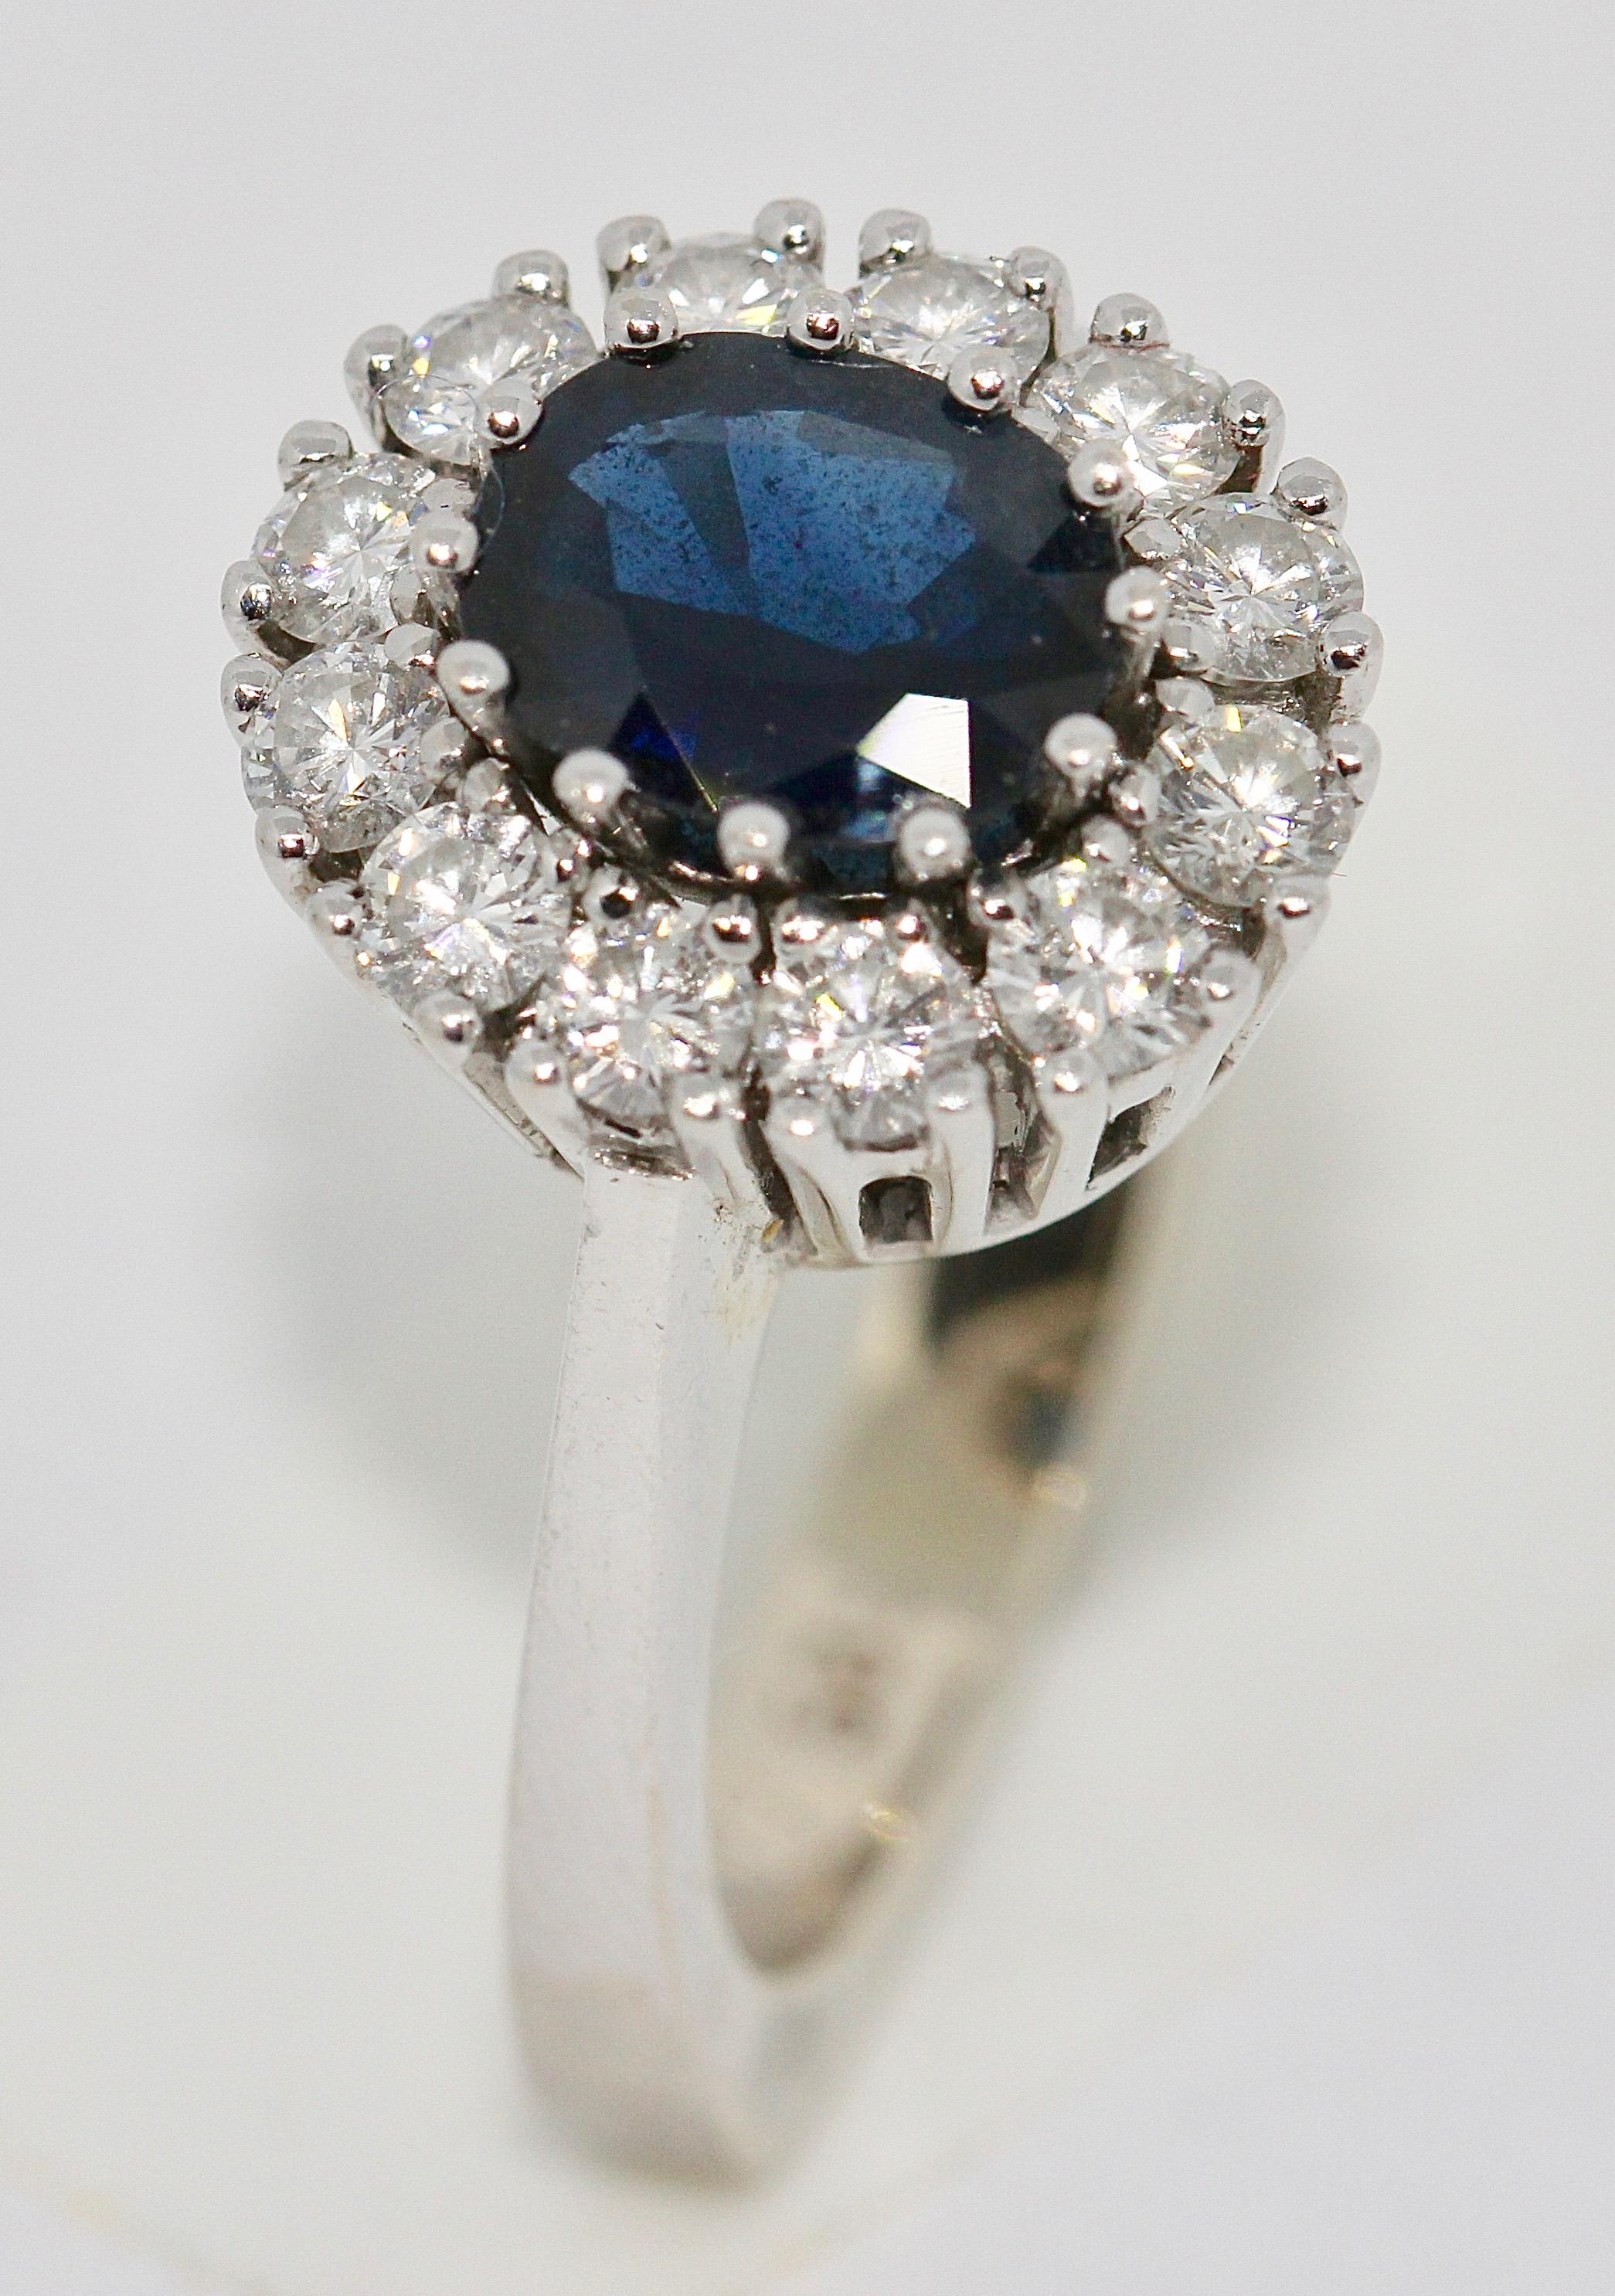 Luxurious white gold ring with 1.17 carat natural sapphire and diamonds.

Total carats of diamonds 0.63.

Sapphire and diamonds are of high quality!

US ring size 6.4 (6)